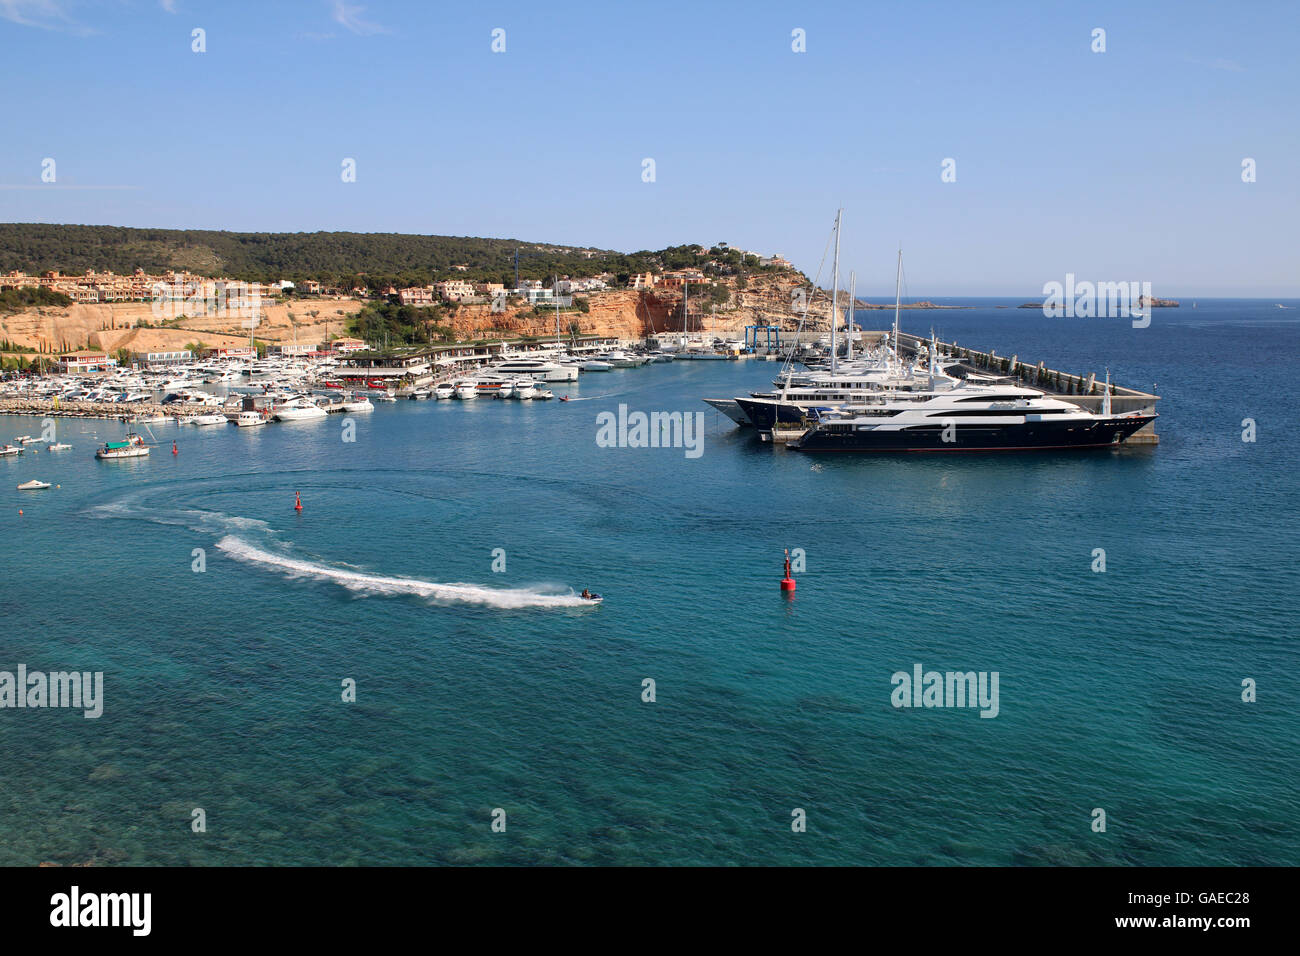 View over Port Adriano marina - Philippe Starck designed superyacht marina and commercial centre  with original marina on LHS Stock Photo